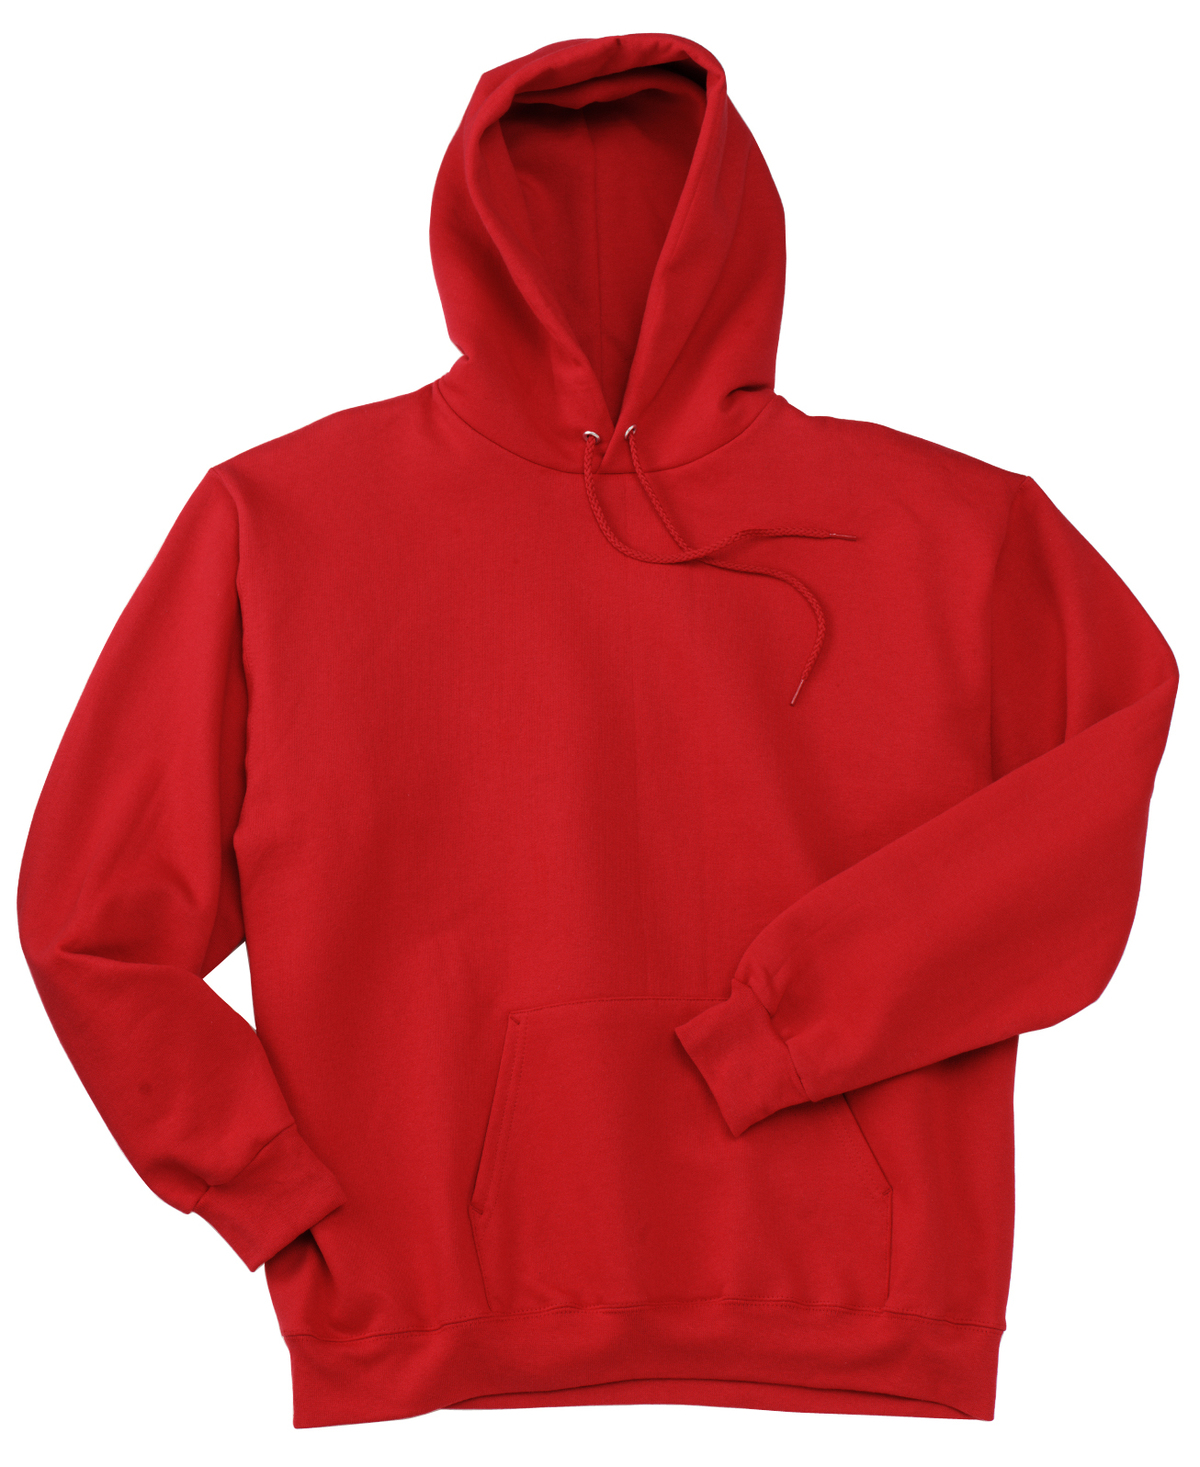 Hanes Ultimate Cotton - Pullover Hooded Sweatshirt, Product